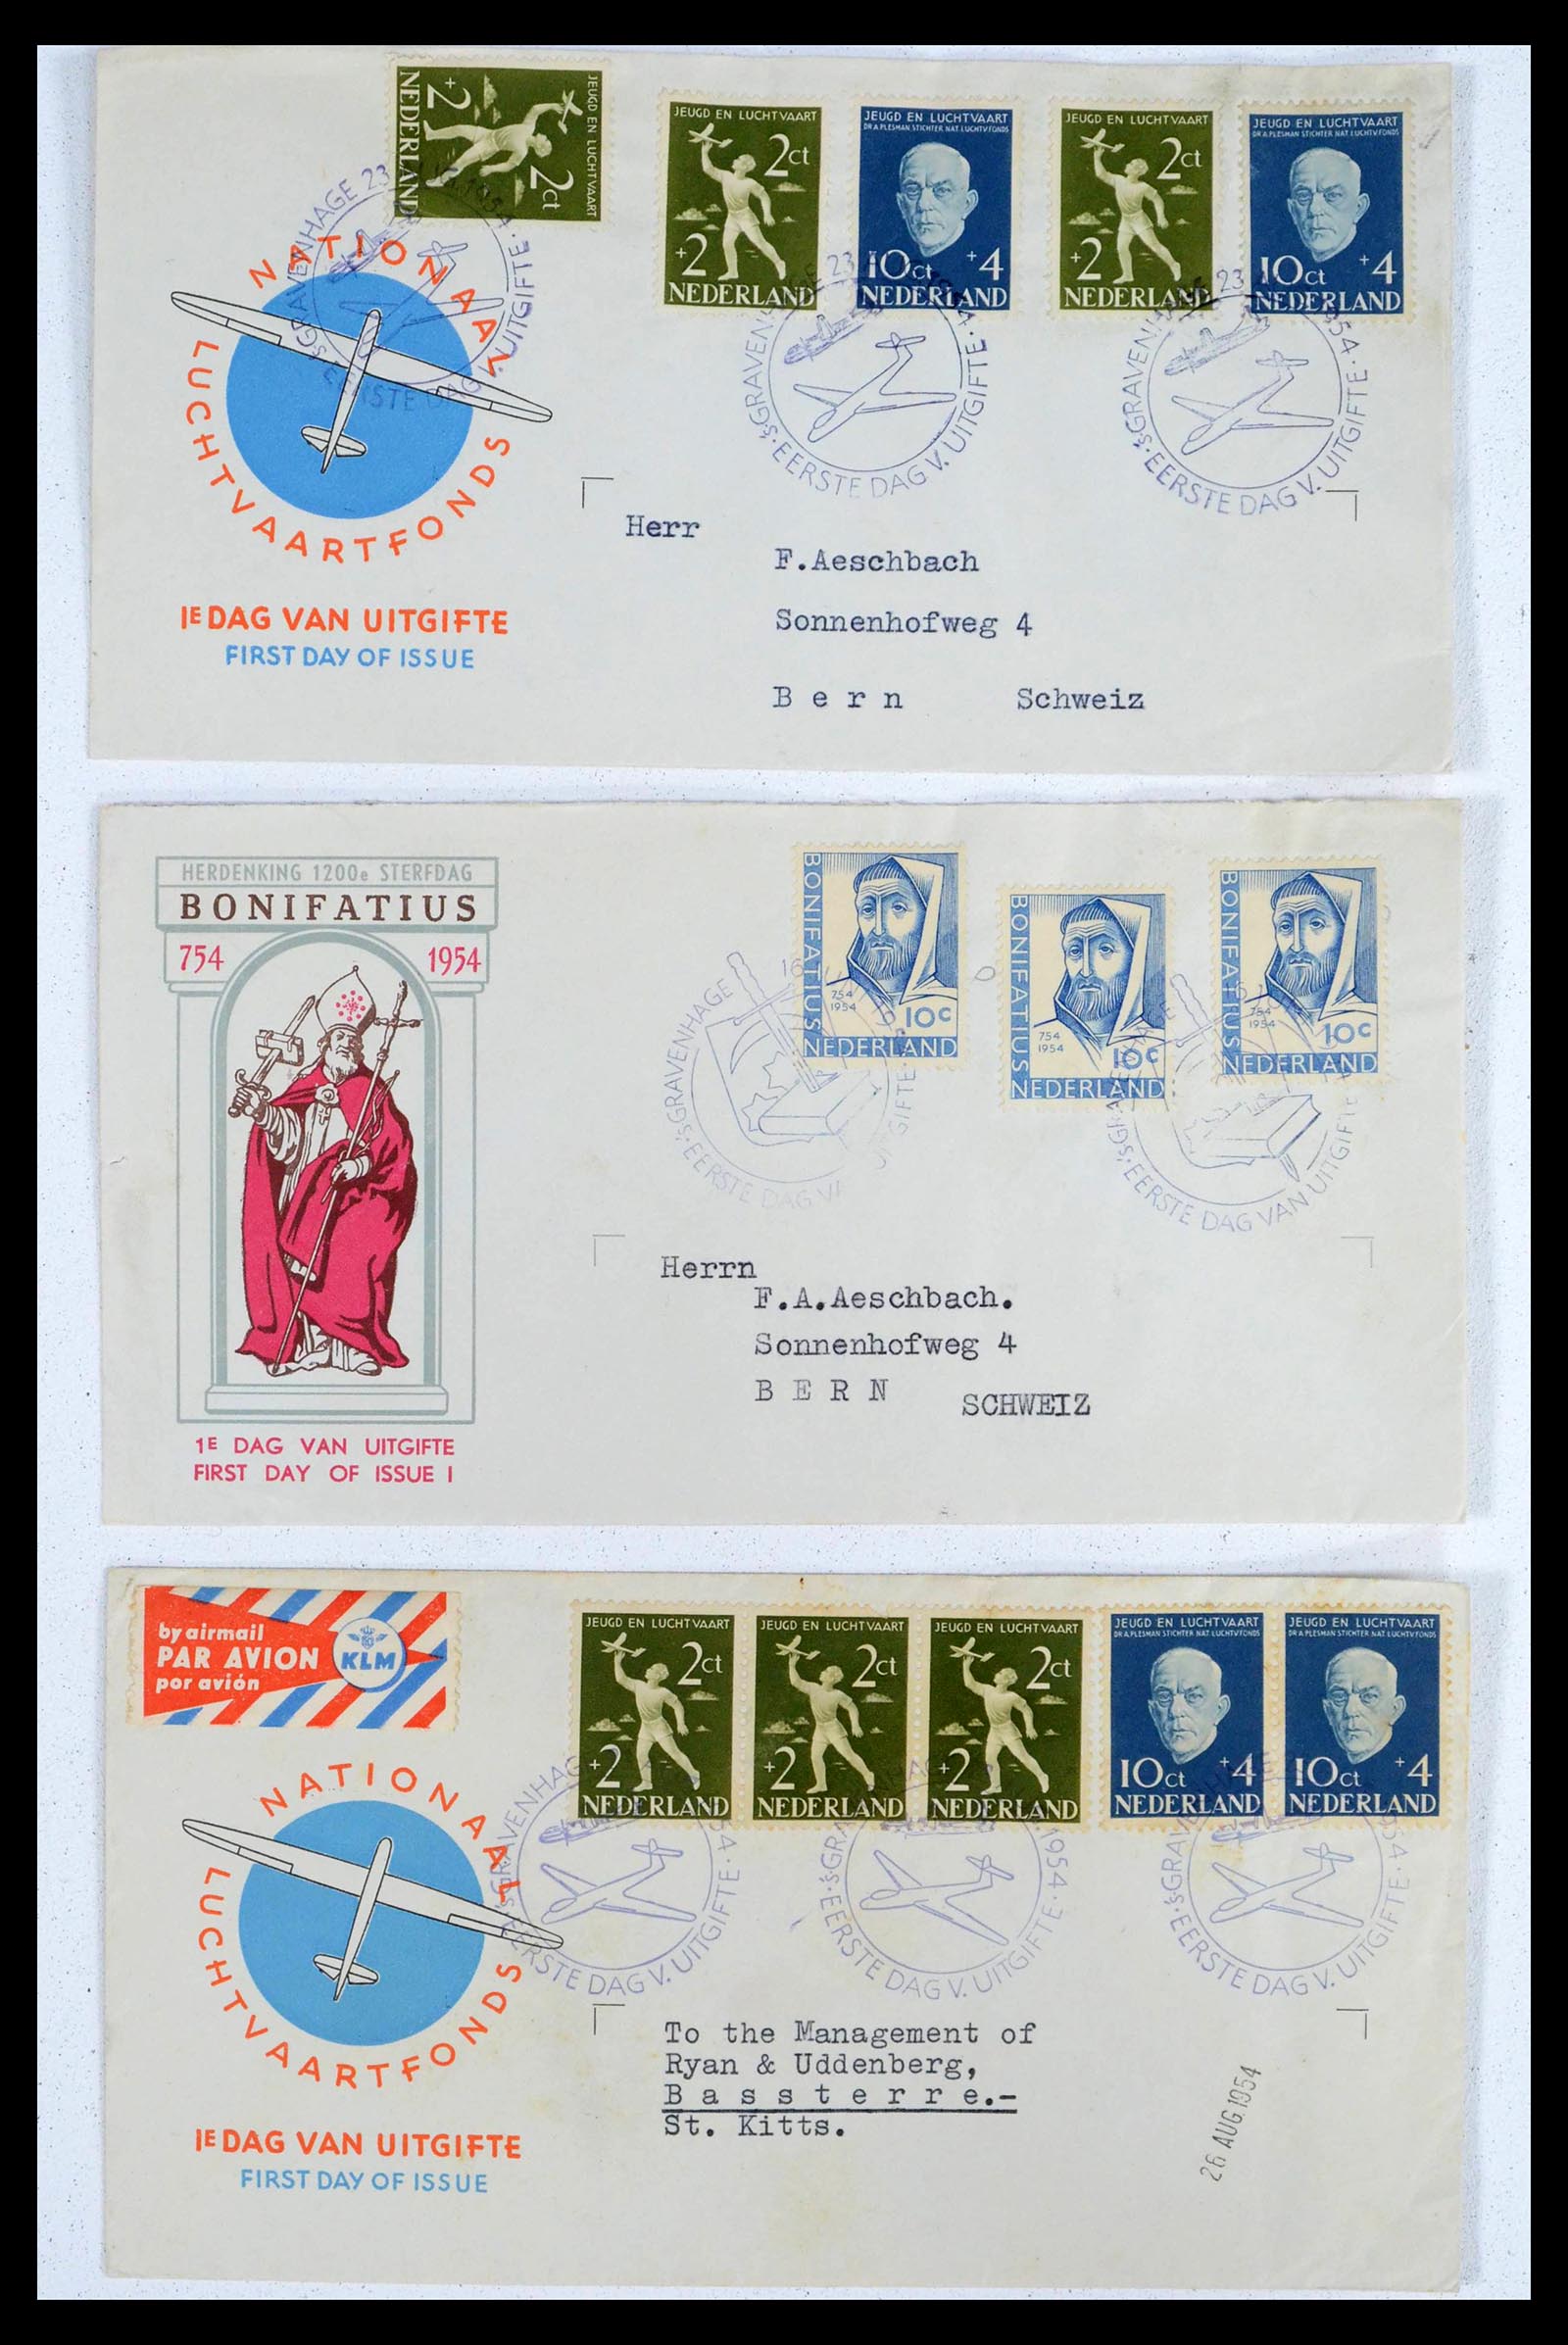 39474 0009 - Stamp collection 39474 Netherlands FDC's 1950-1960.